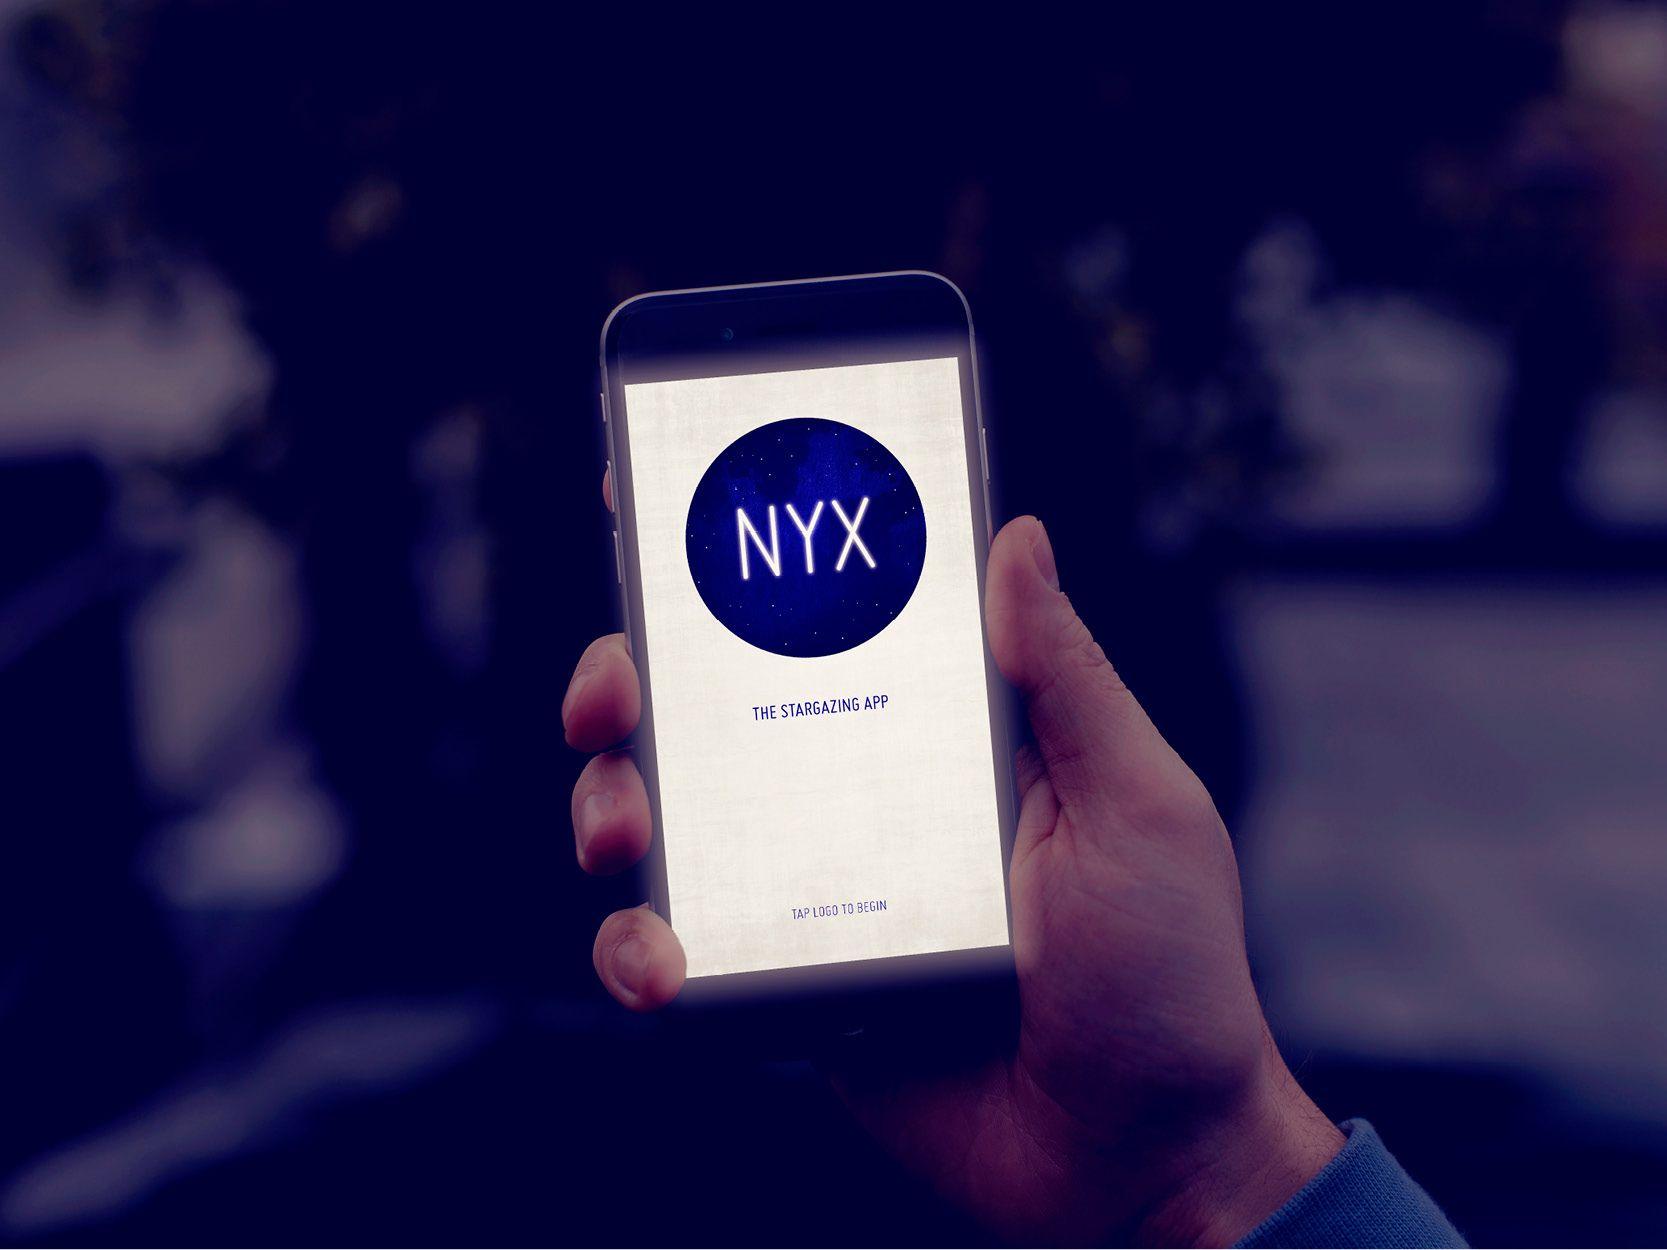 NYX Mobile Logo - Briefbox — Nyx – The Stargazing App by dean russell